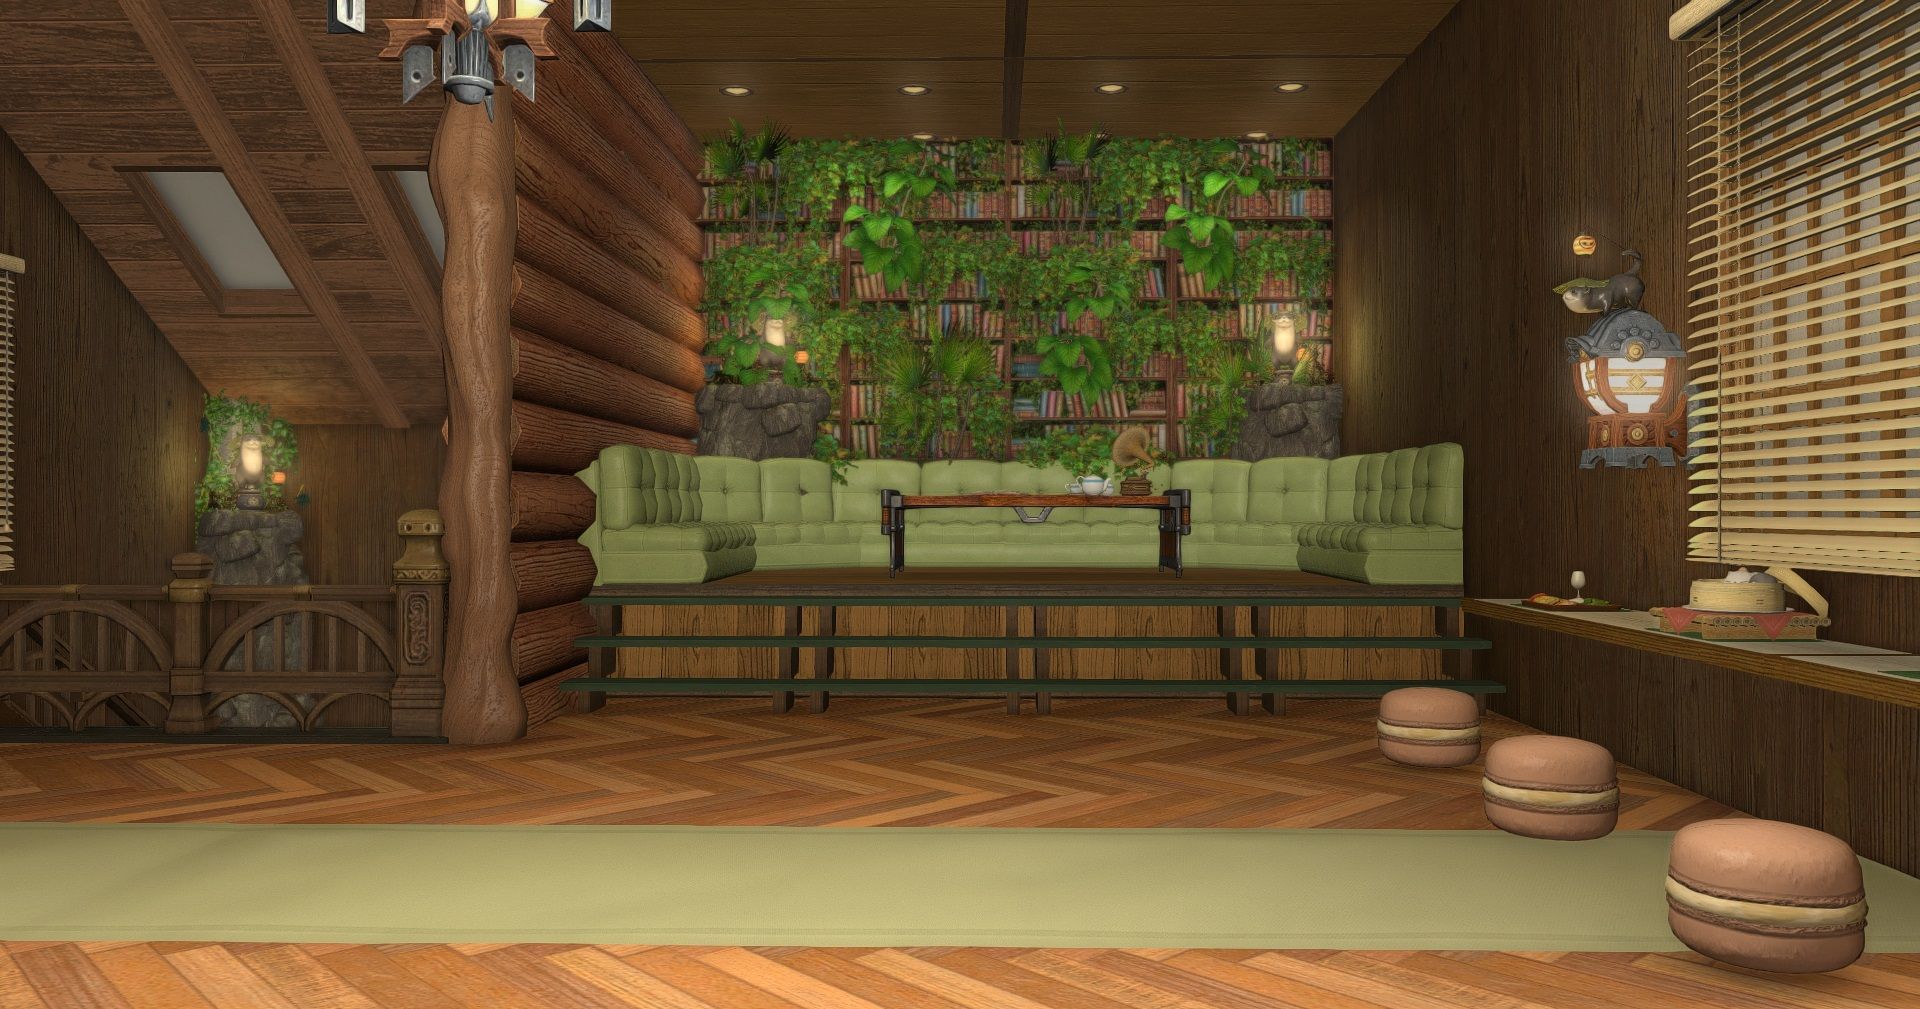 Final Fantasy 14 Otter by the Water cafe interior 2